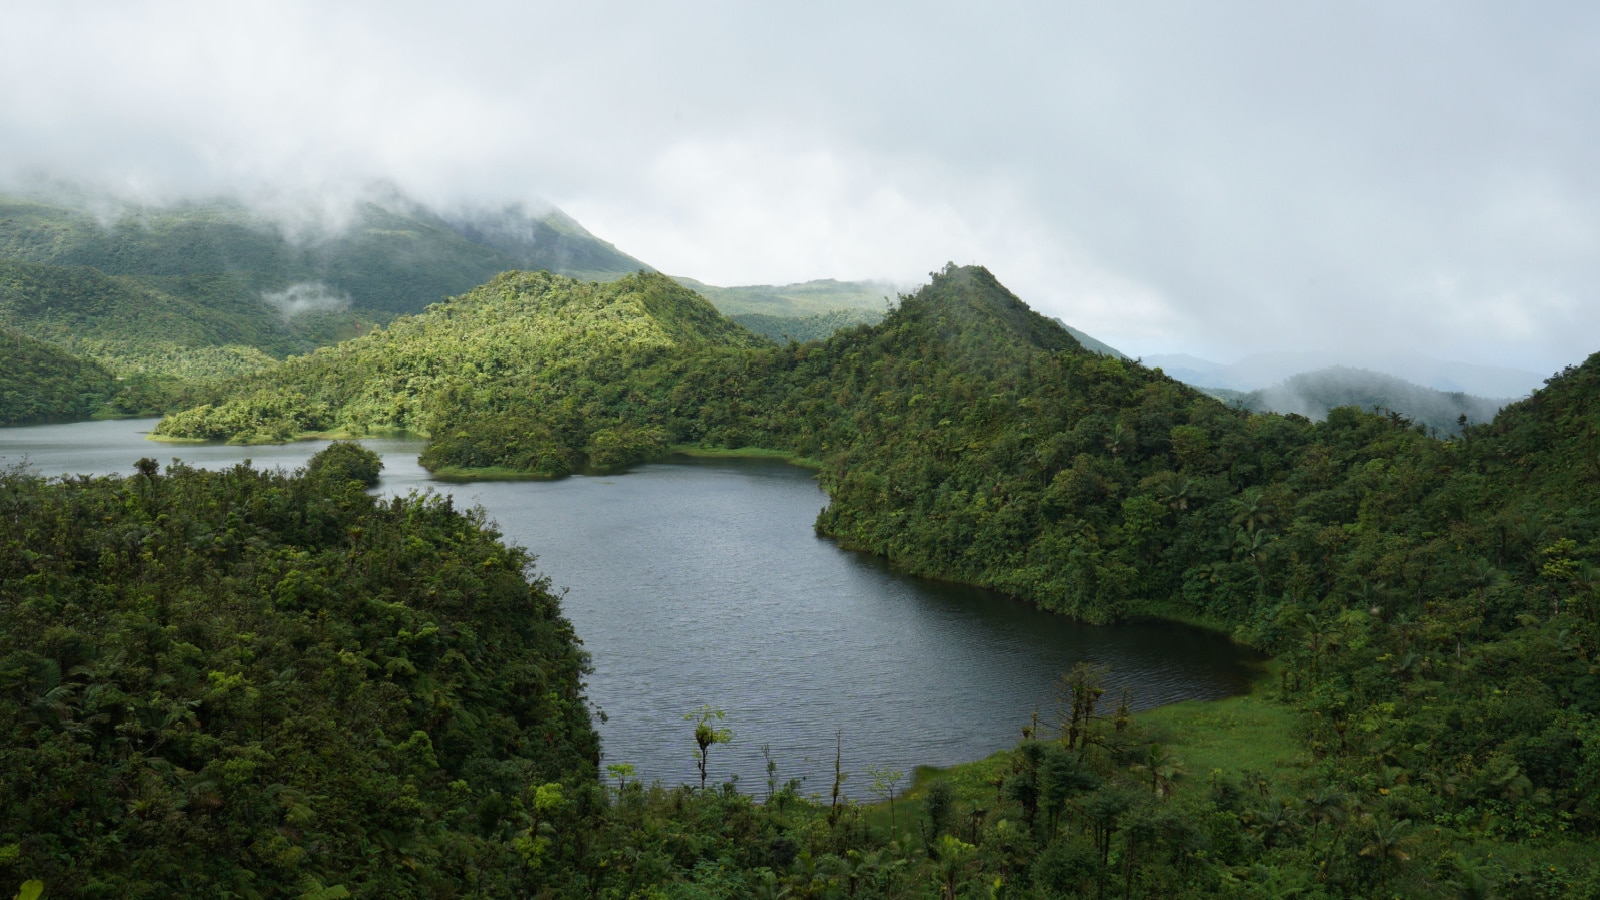 The Freshwater Lake, Morne Trois Pitons National Park (UNESCO Heritage Site), Dominica